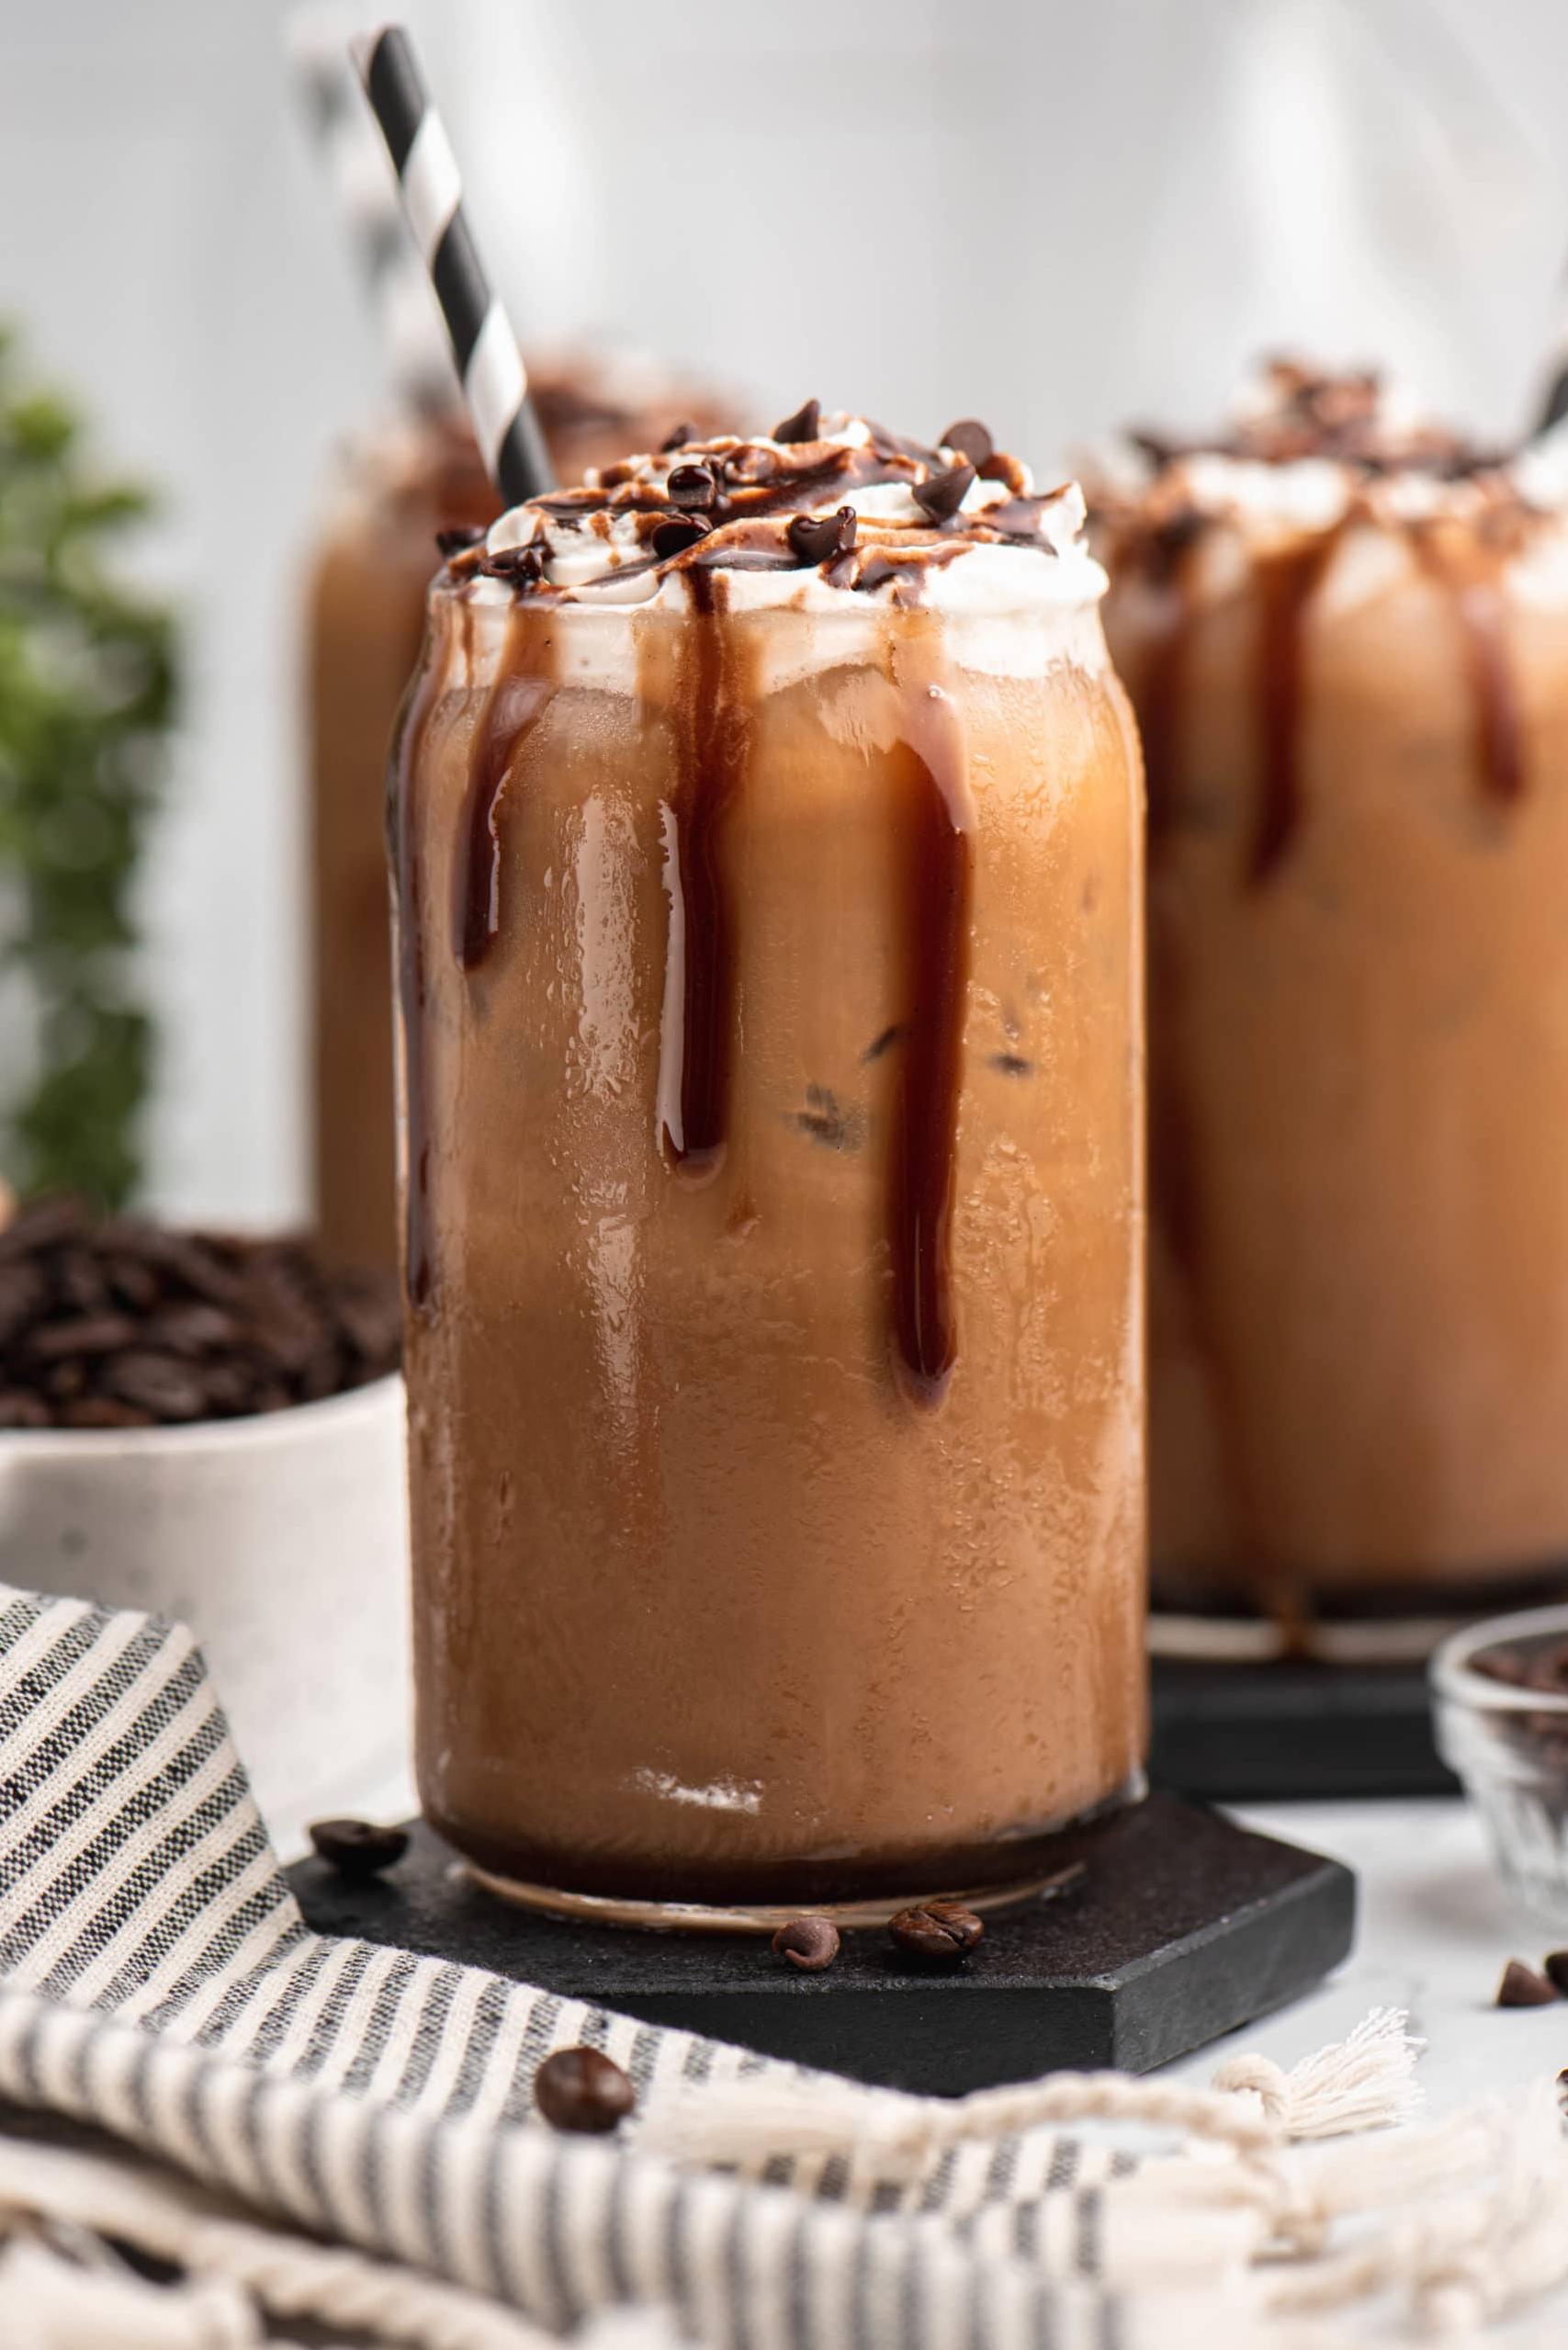  A refreshing blend of coffee, chocolate, and cream